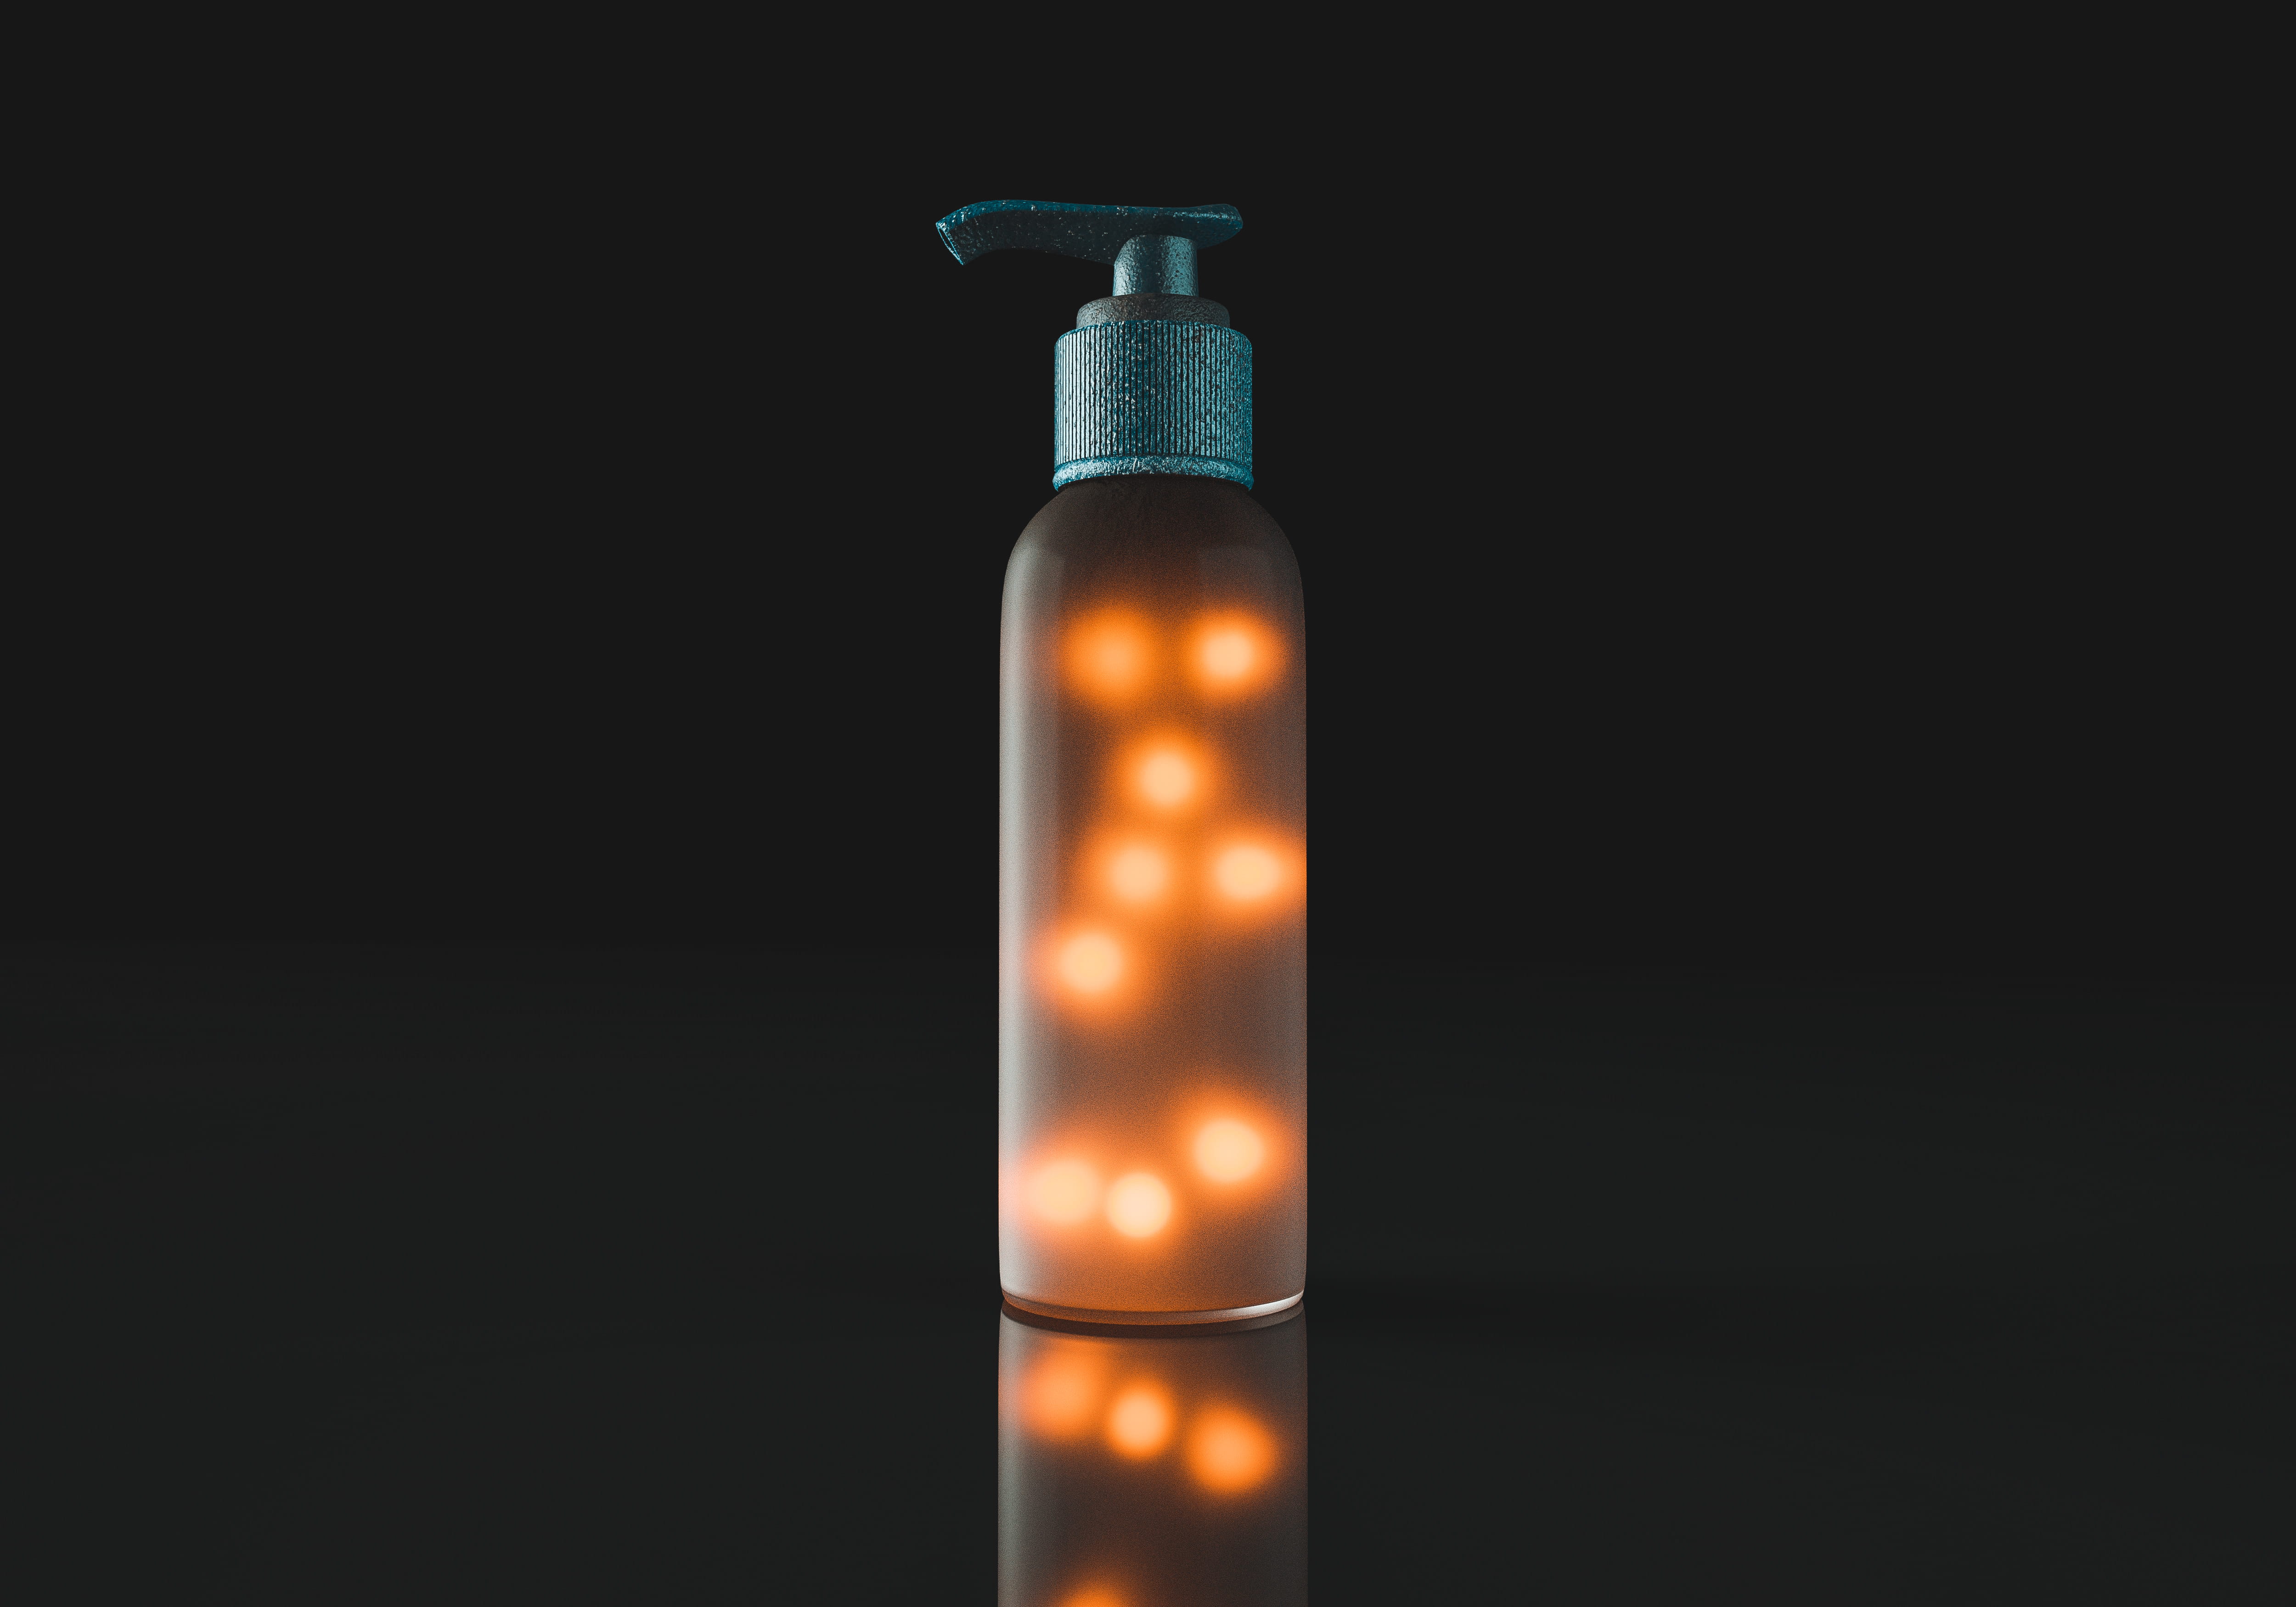 Brown and Gray Lighted Pump Bottle With Black Background, 4k wallpaper